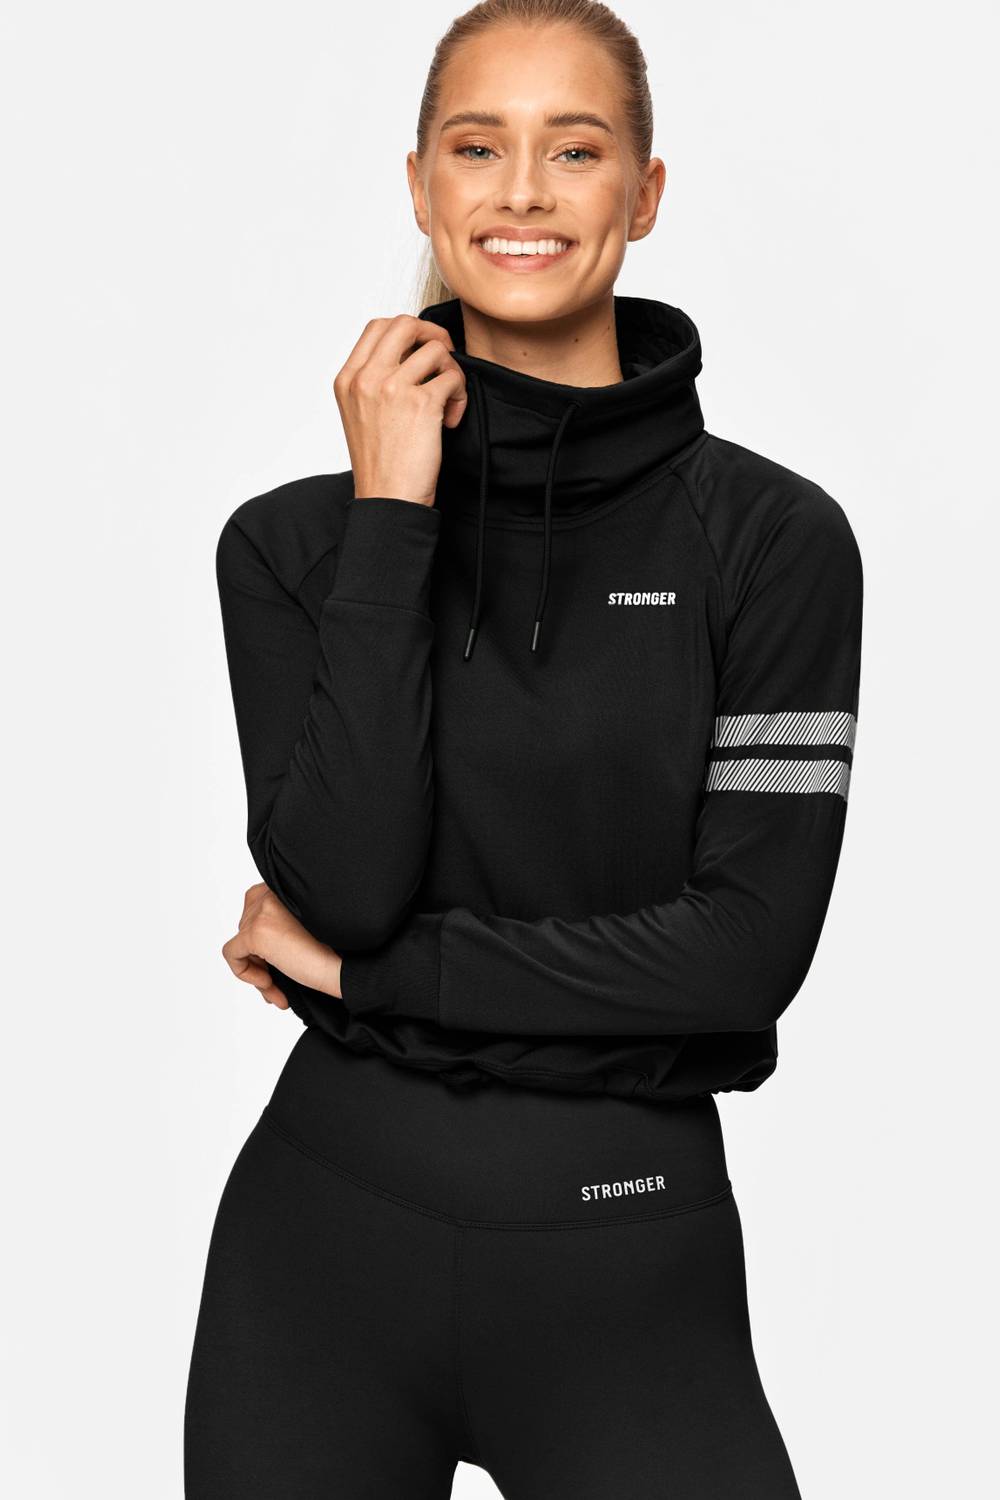 New Year New You Women's Workout Turtleneck